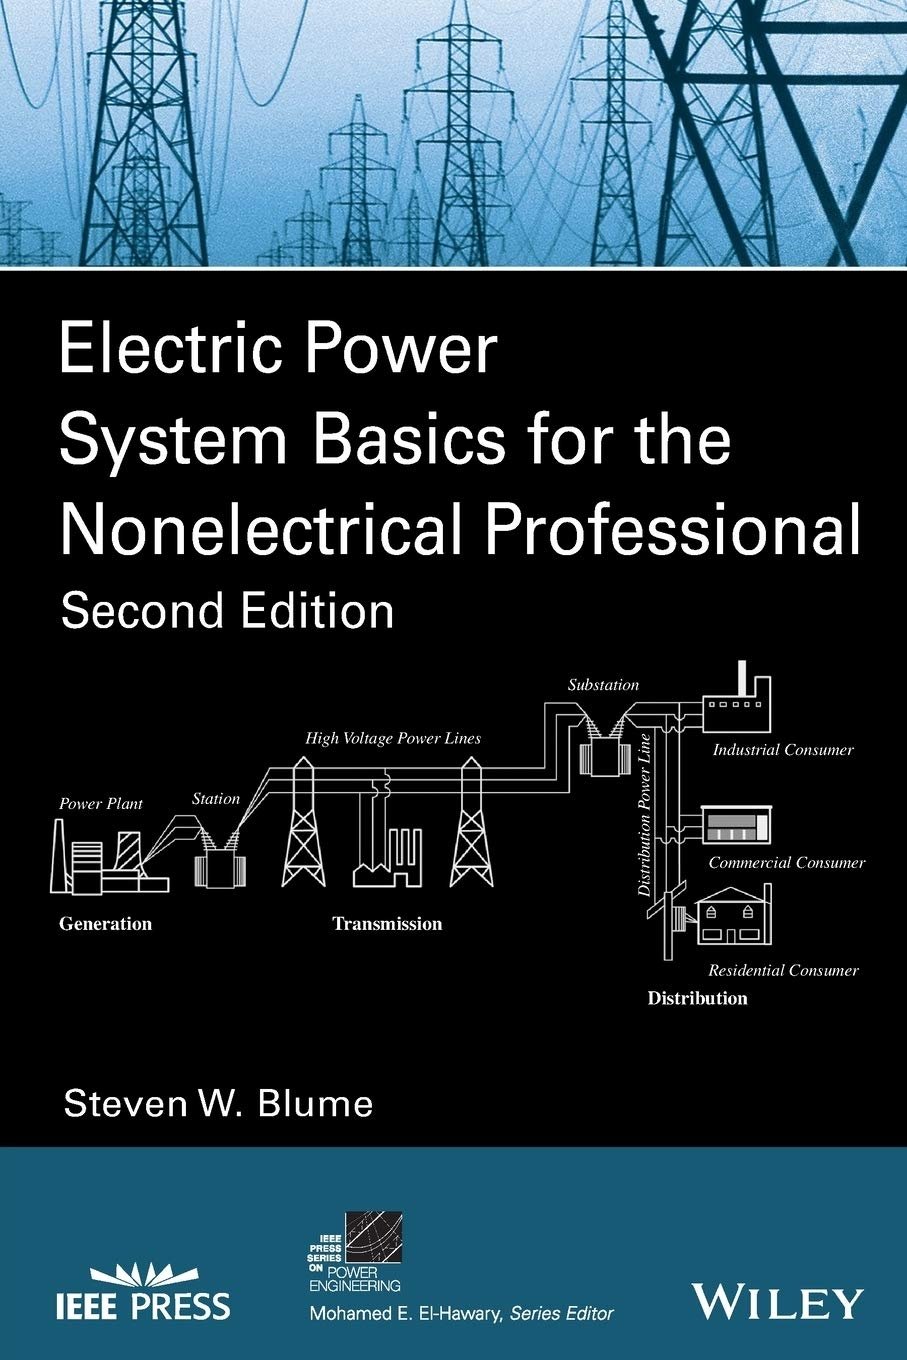 Download Electric Power System Basics for the Nonelectrical